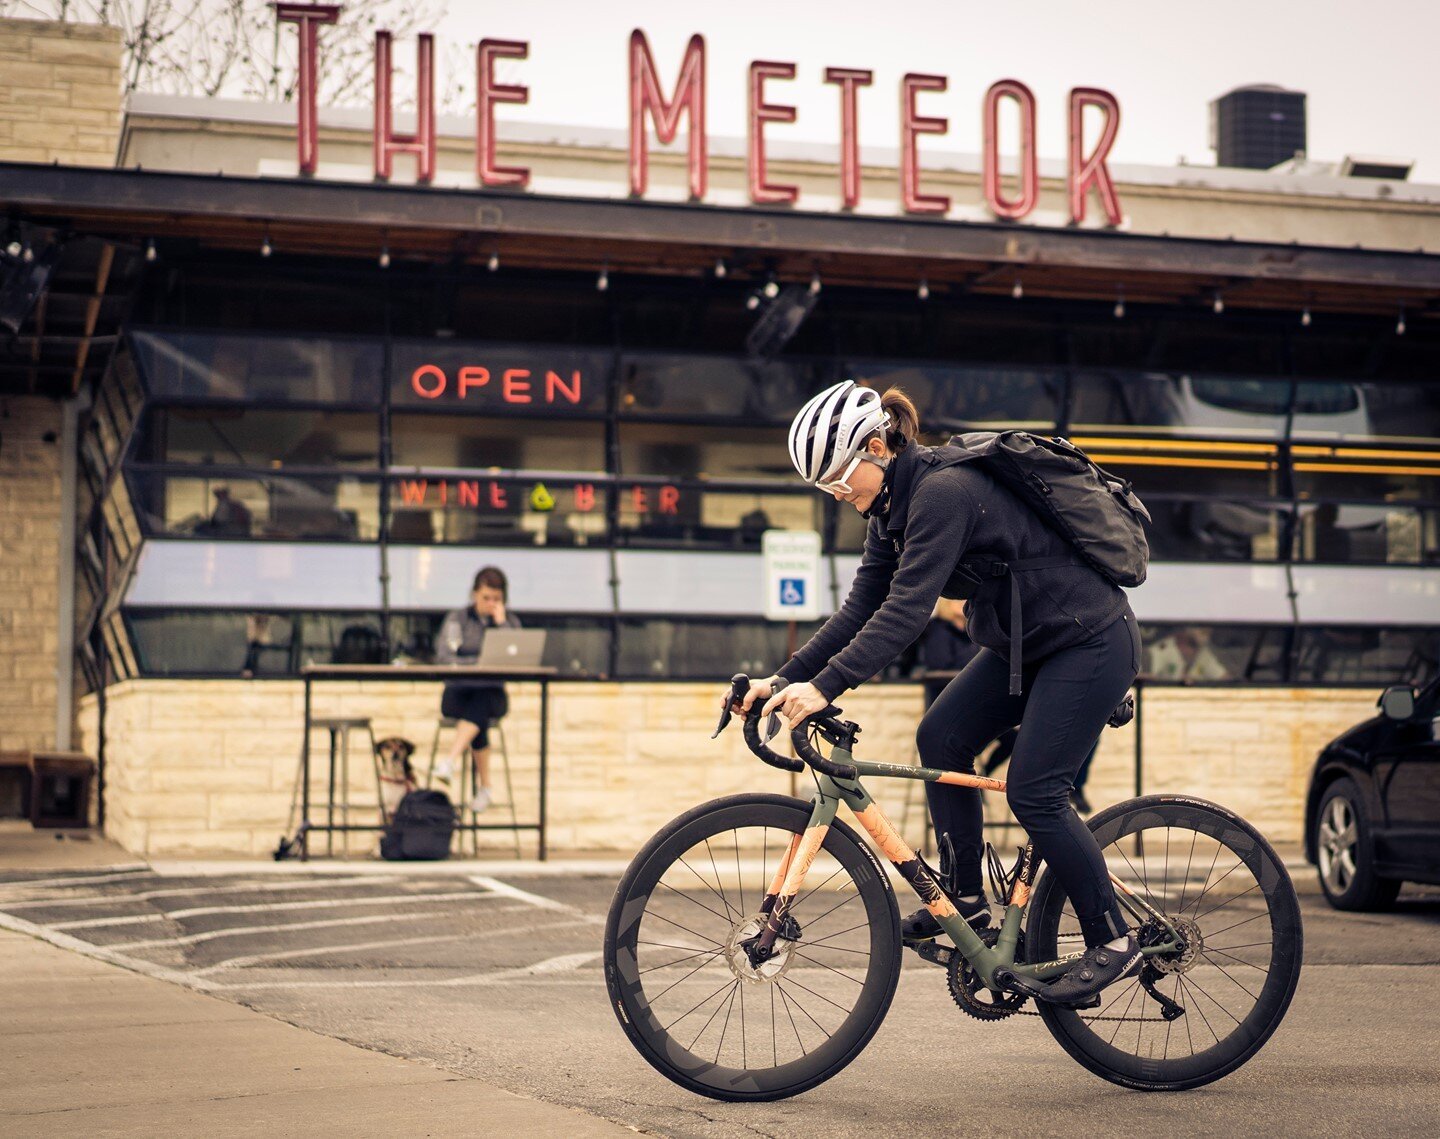 Ten out of ten doctors recommend commuting by bike (with a quick stop by The Meteor for #espressochampagnechainlube).⠀
#sunupsundown⠀